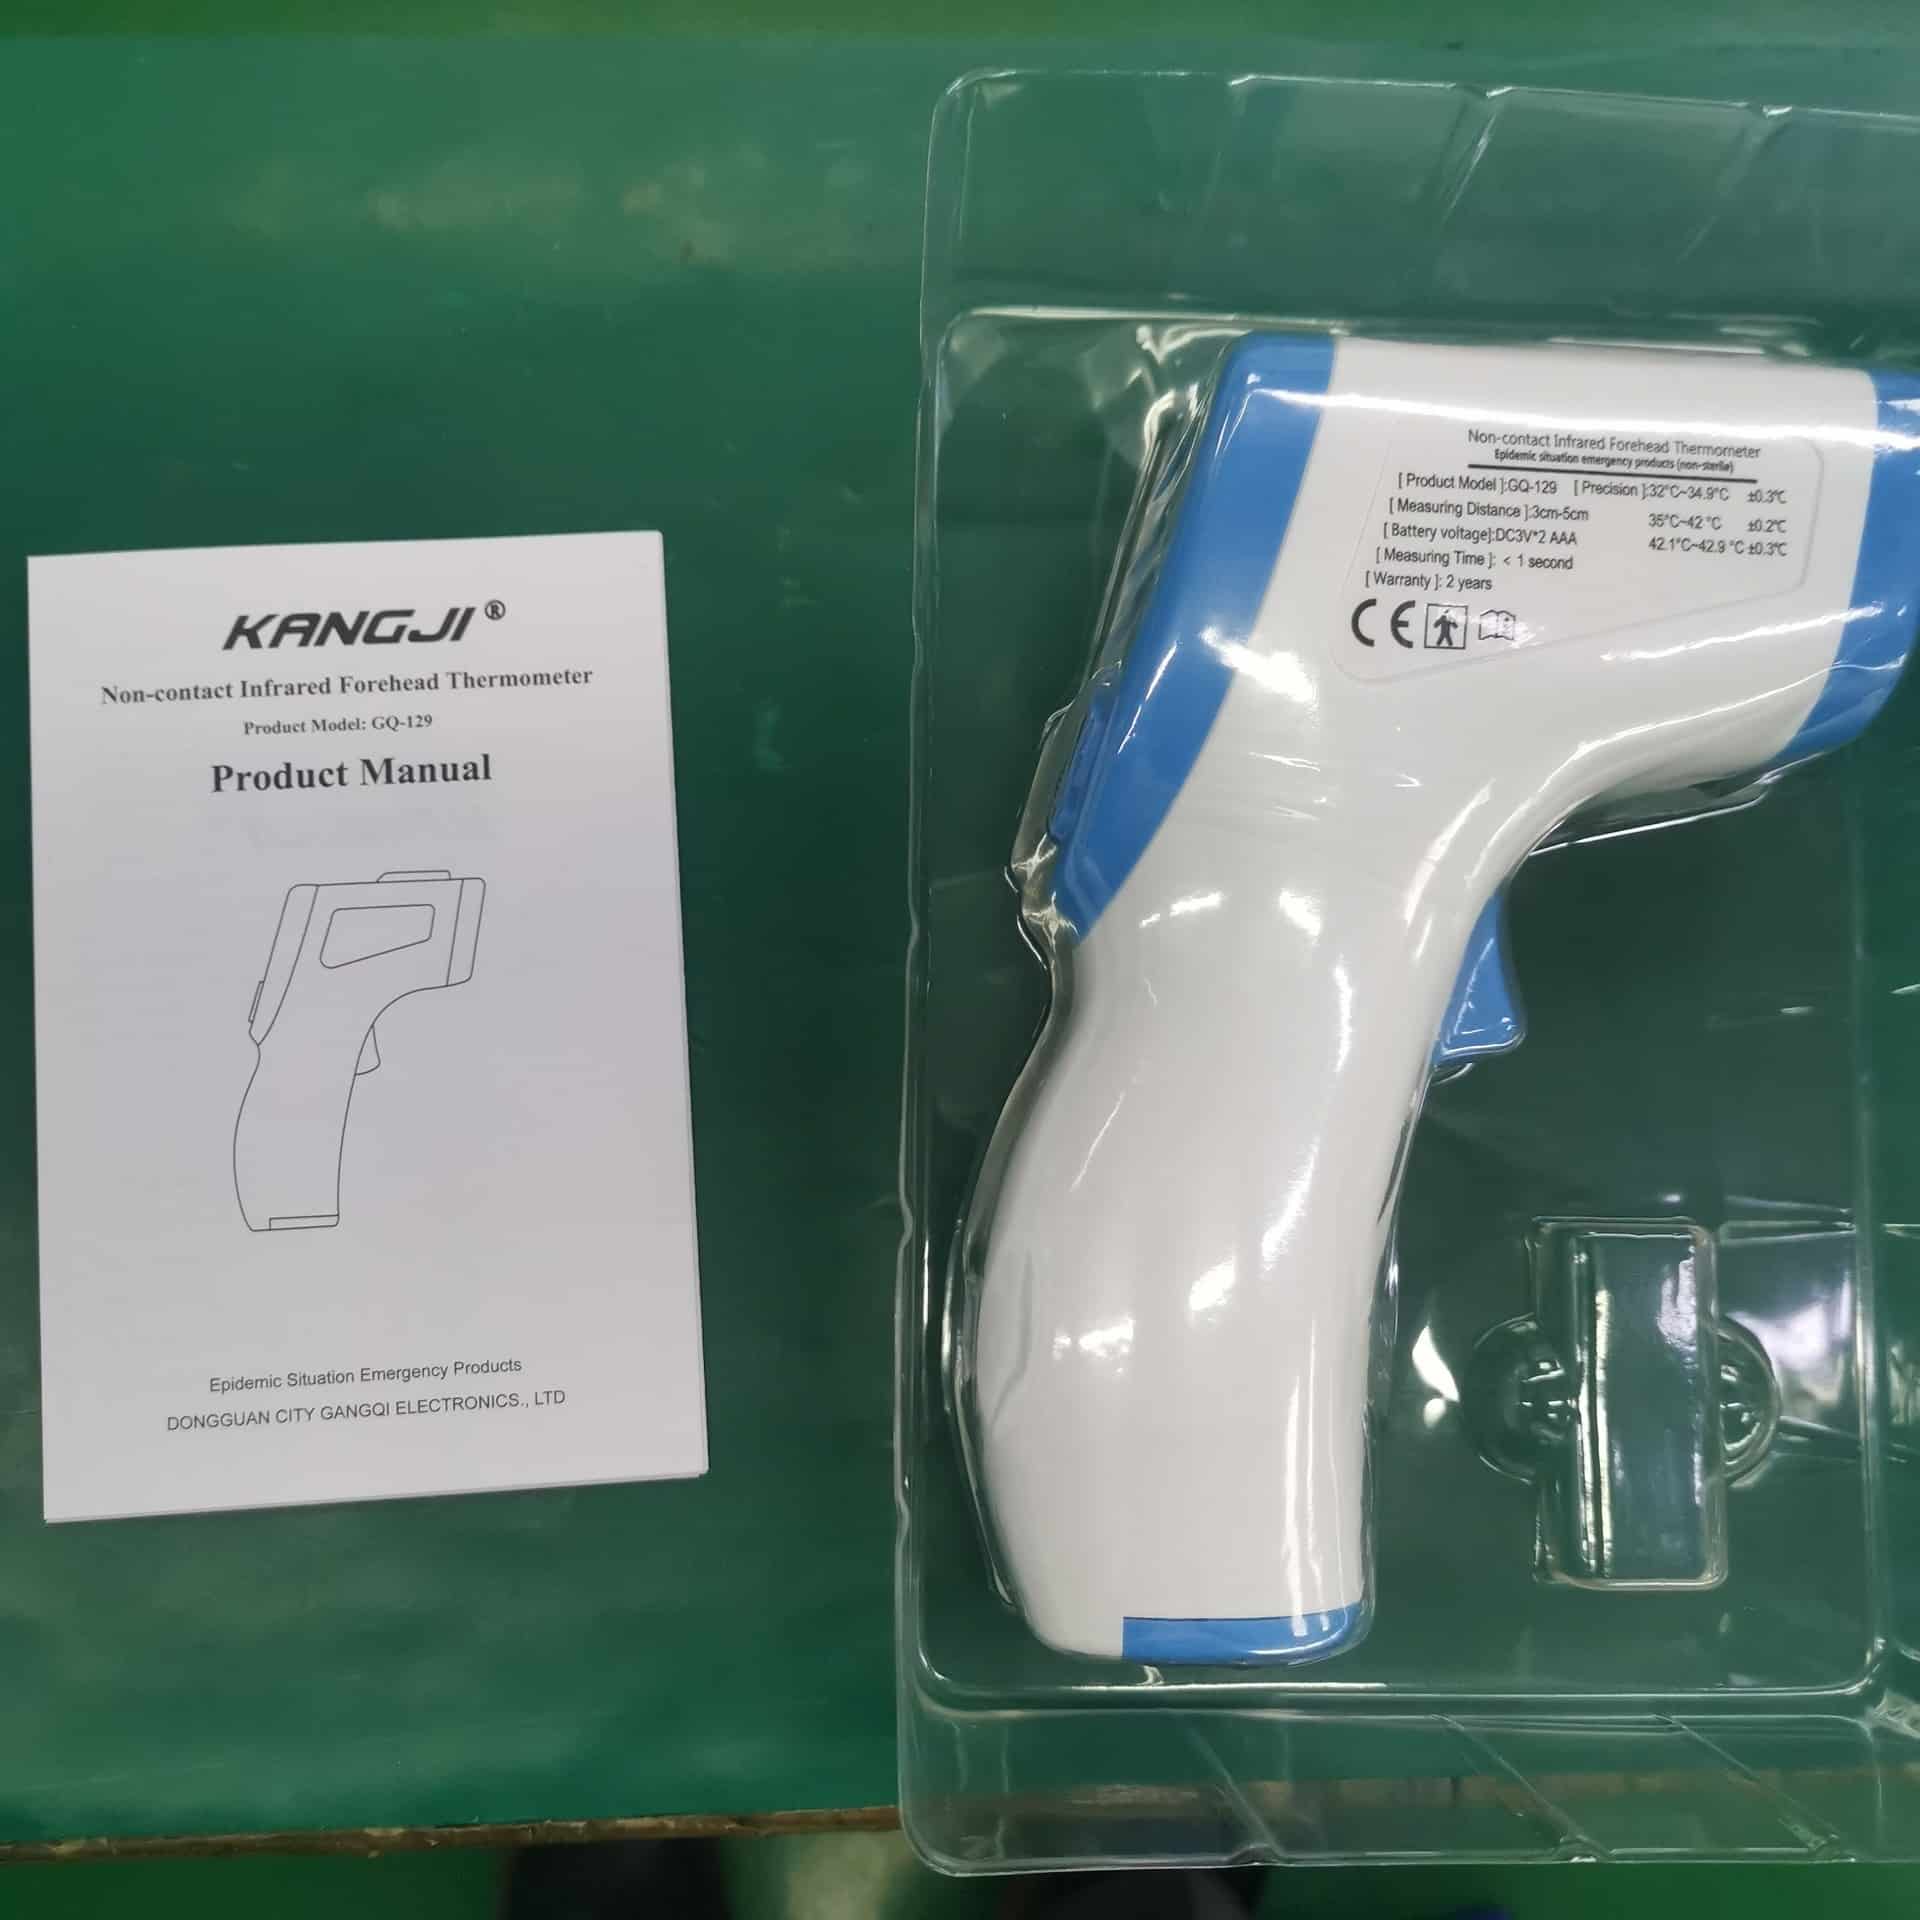 Medical grade non-contact infrared thermometer